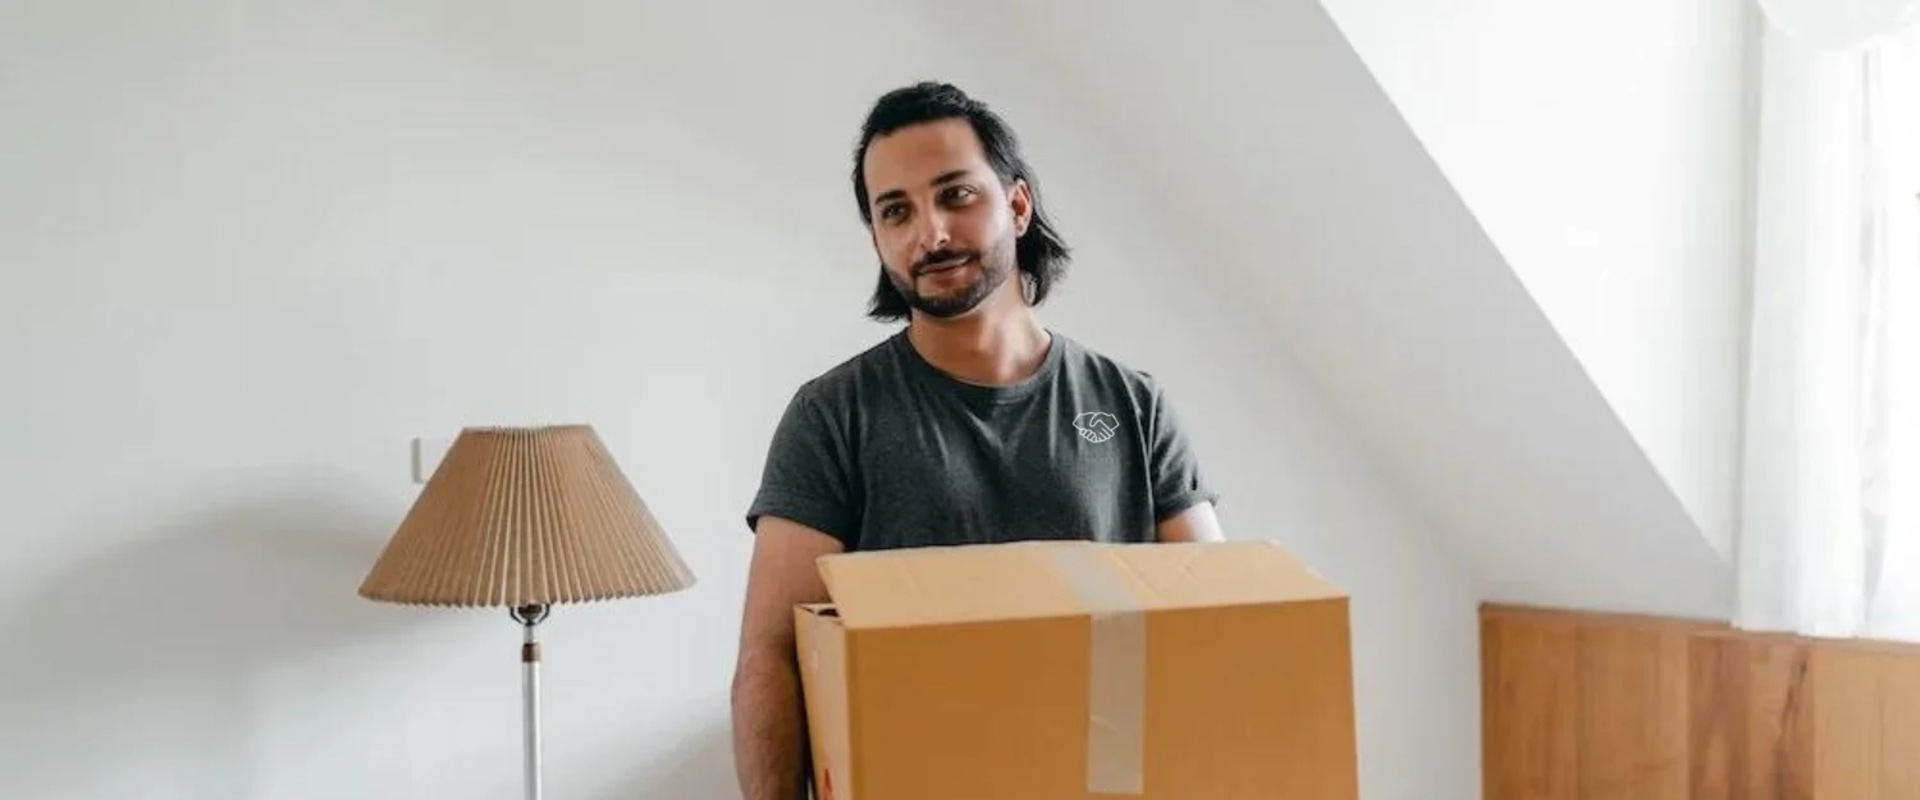 Expert Tips for Saving 10% on Local Movers in Miami Gardens